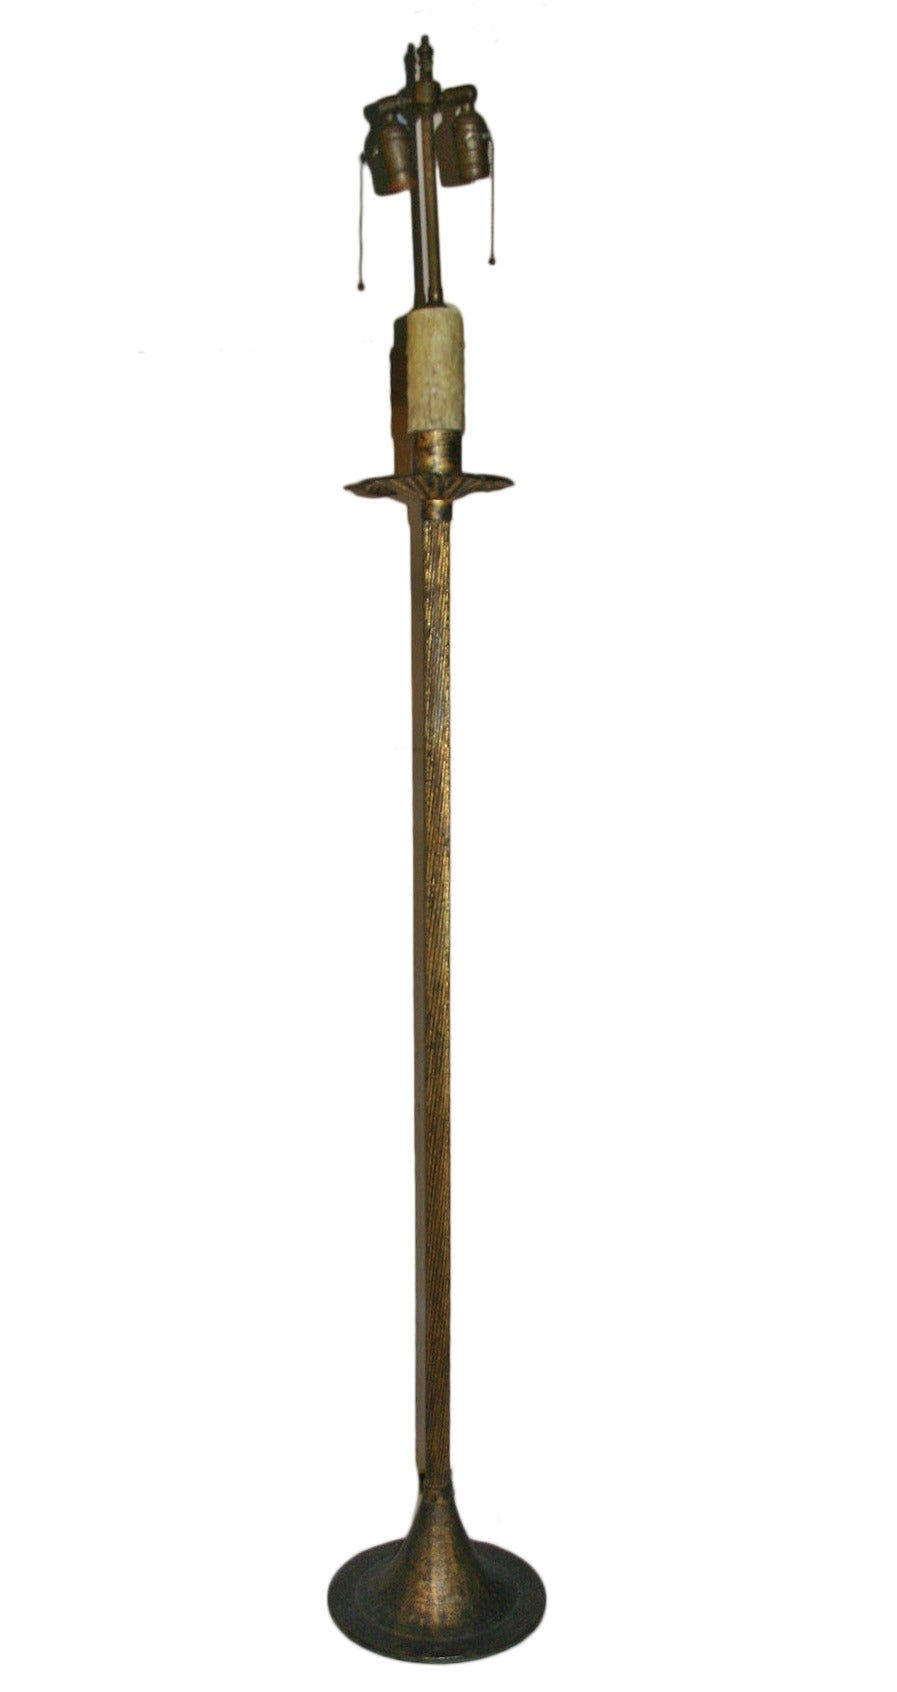 A circa 1930's French Gilt metal floor lamp.

Measurements:
Height of body: 54